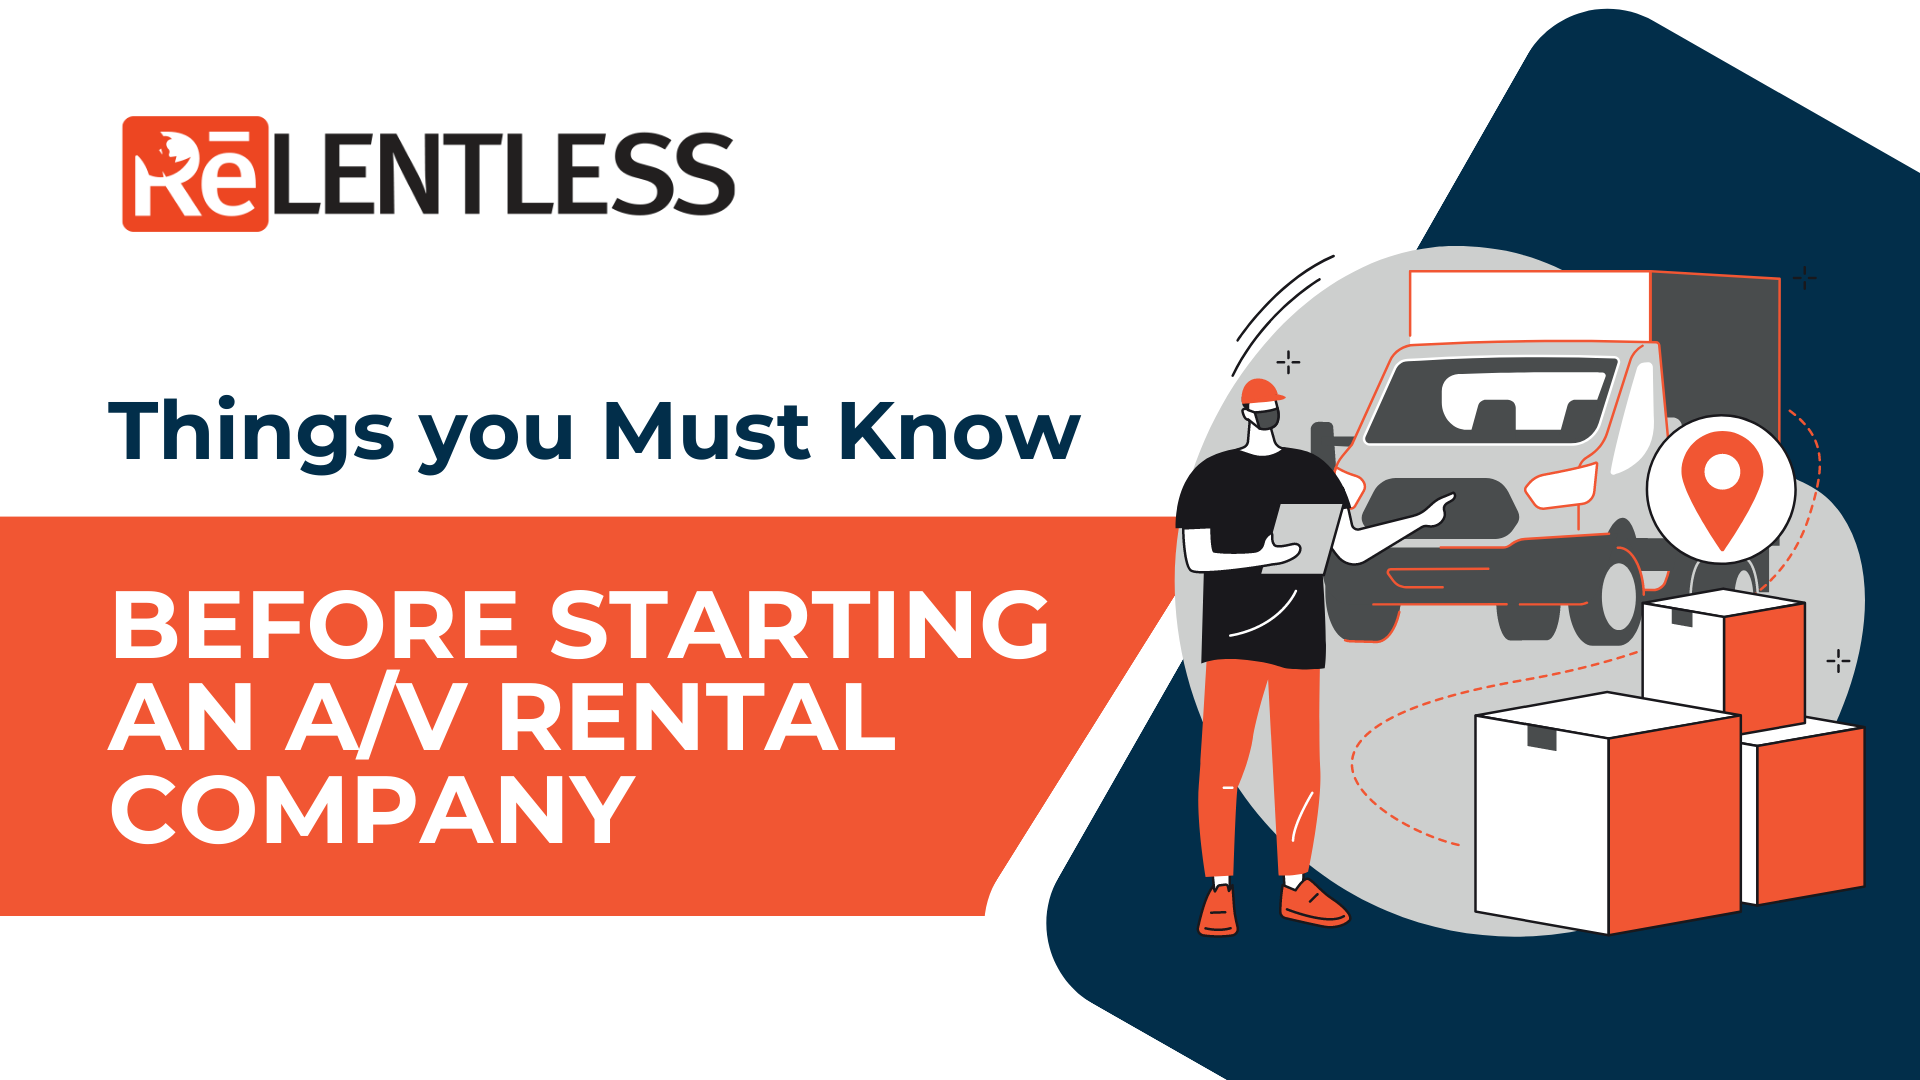 Things you Must Know Before Starting an AV Rental Company